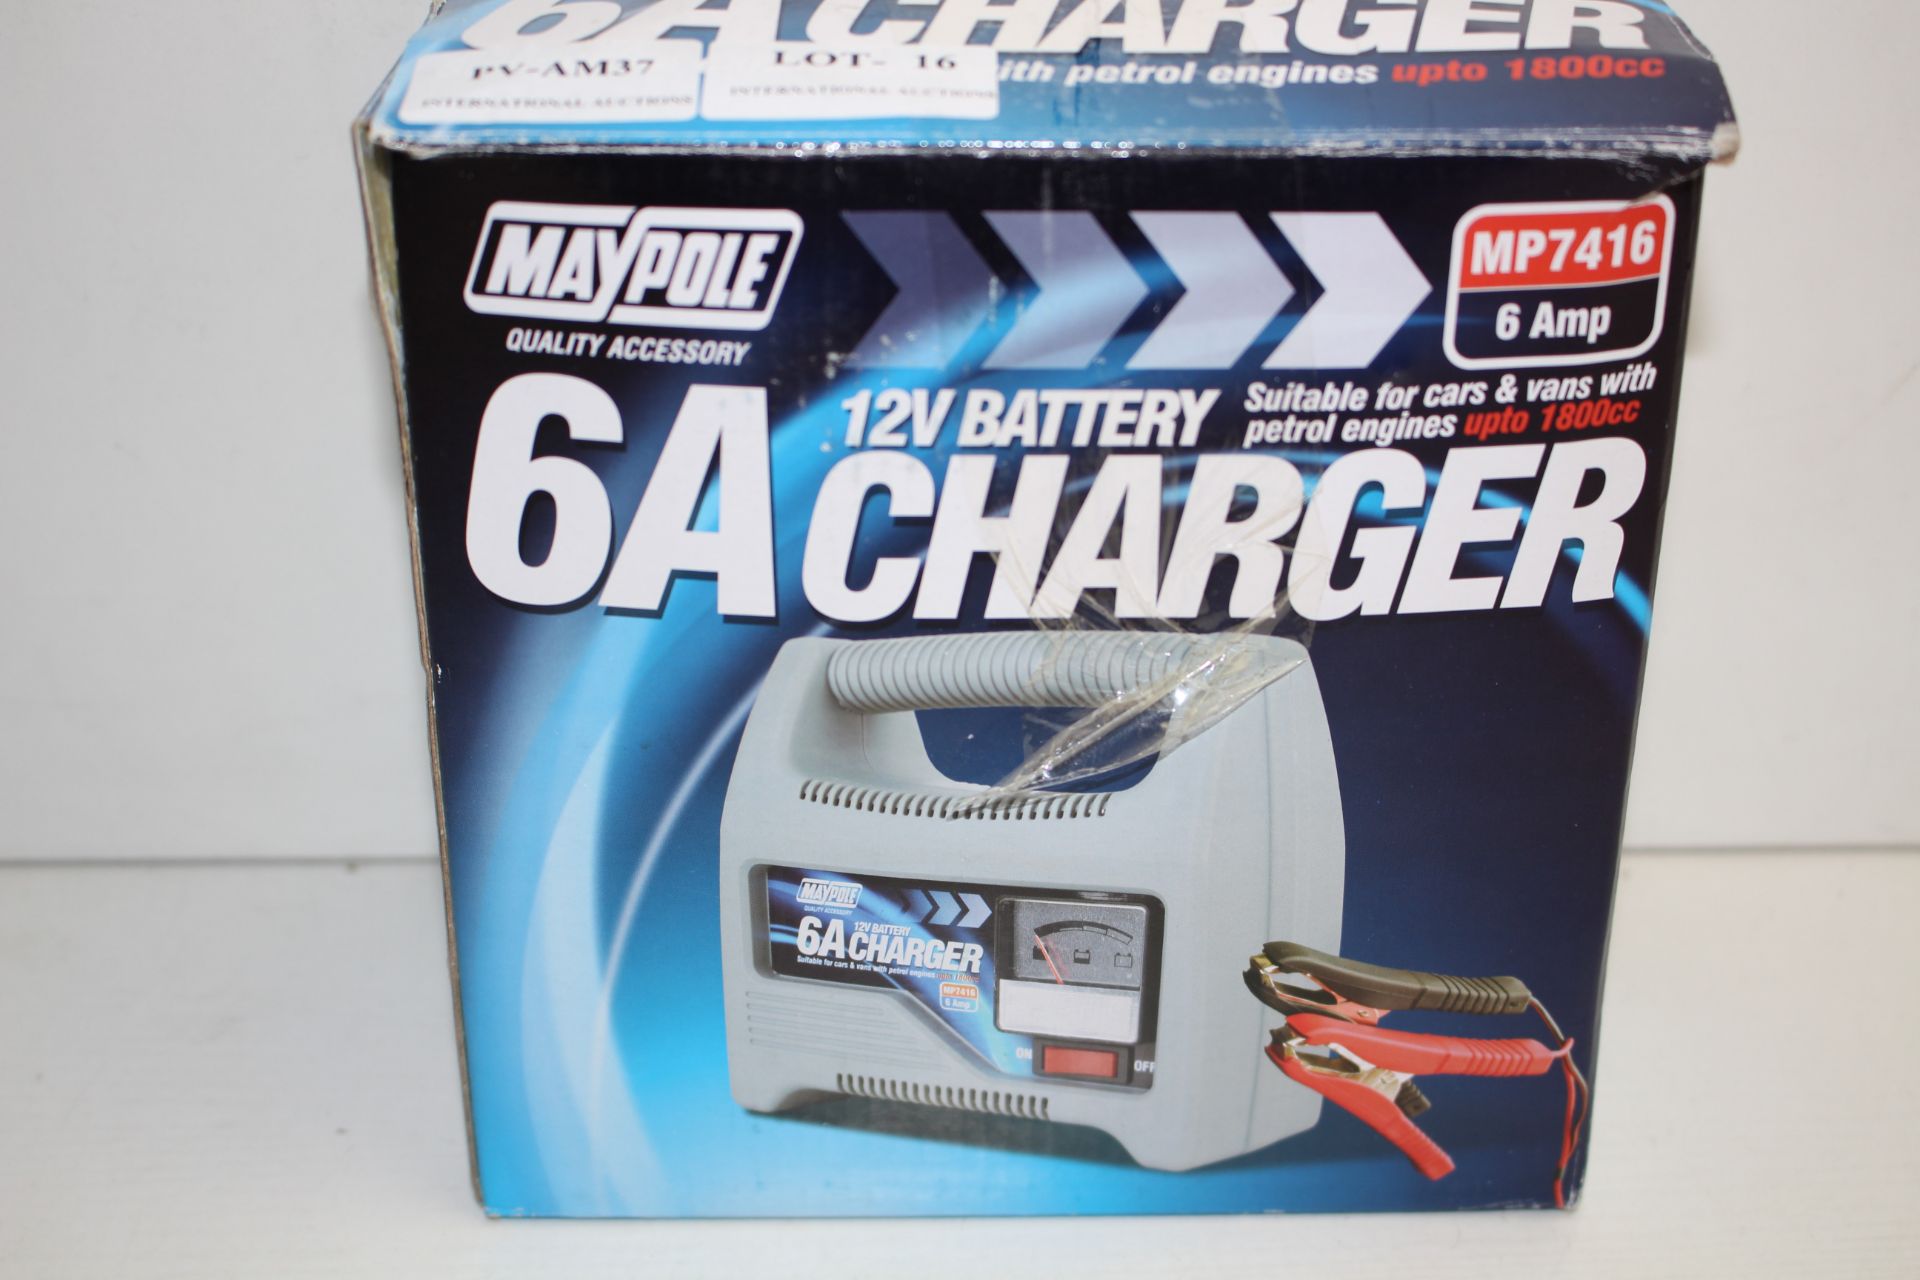 BOXED MAYPOLE 6A 12V BATTERY CHARGER MODEL: MP7416 RRP £24.99Condition ReportAppraisal Available